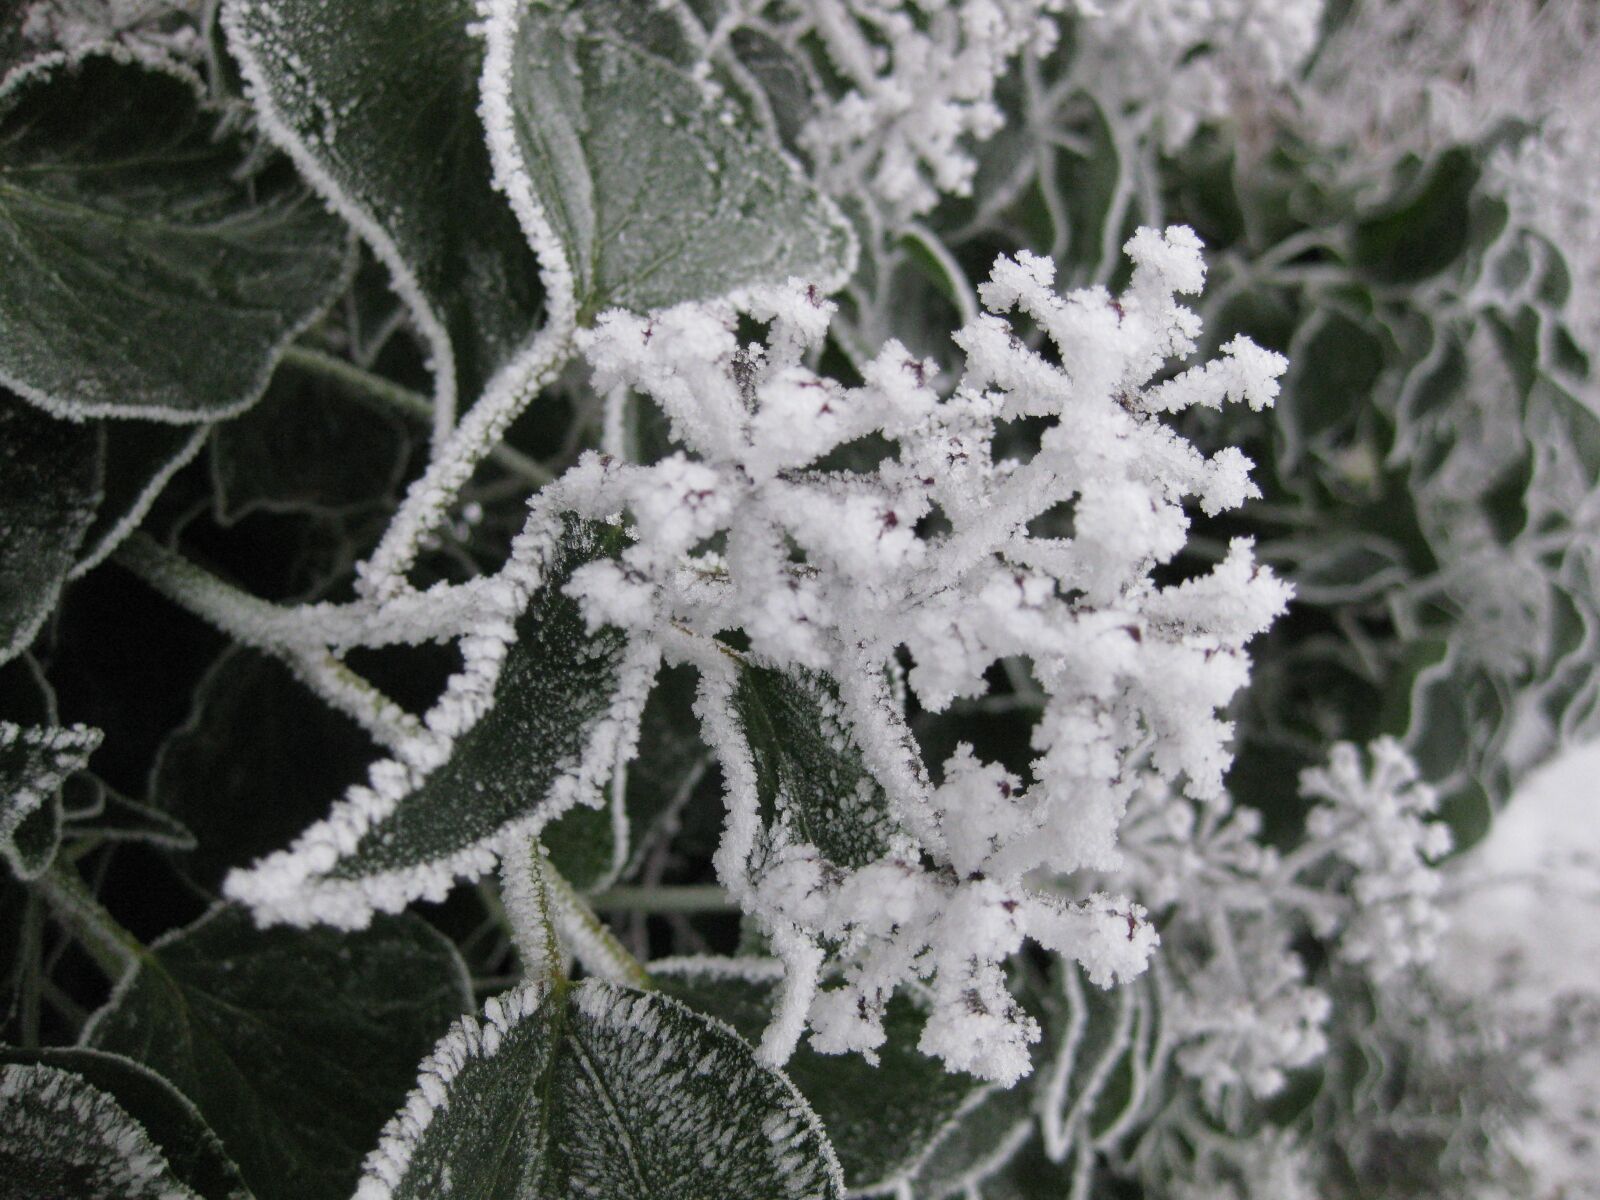 Canon PowerShot SD770 IS (Digital IXUS 85 IS / IXY Digital 25 IS) sample photo. Frost, winter, nature photography